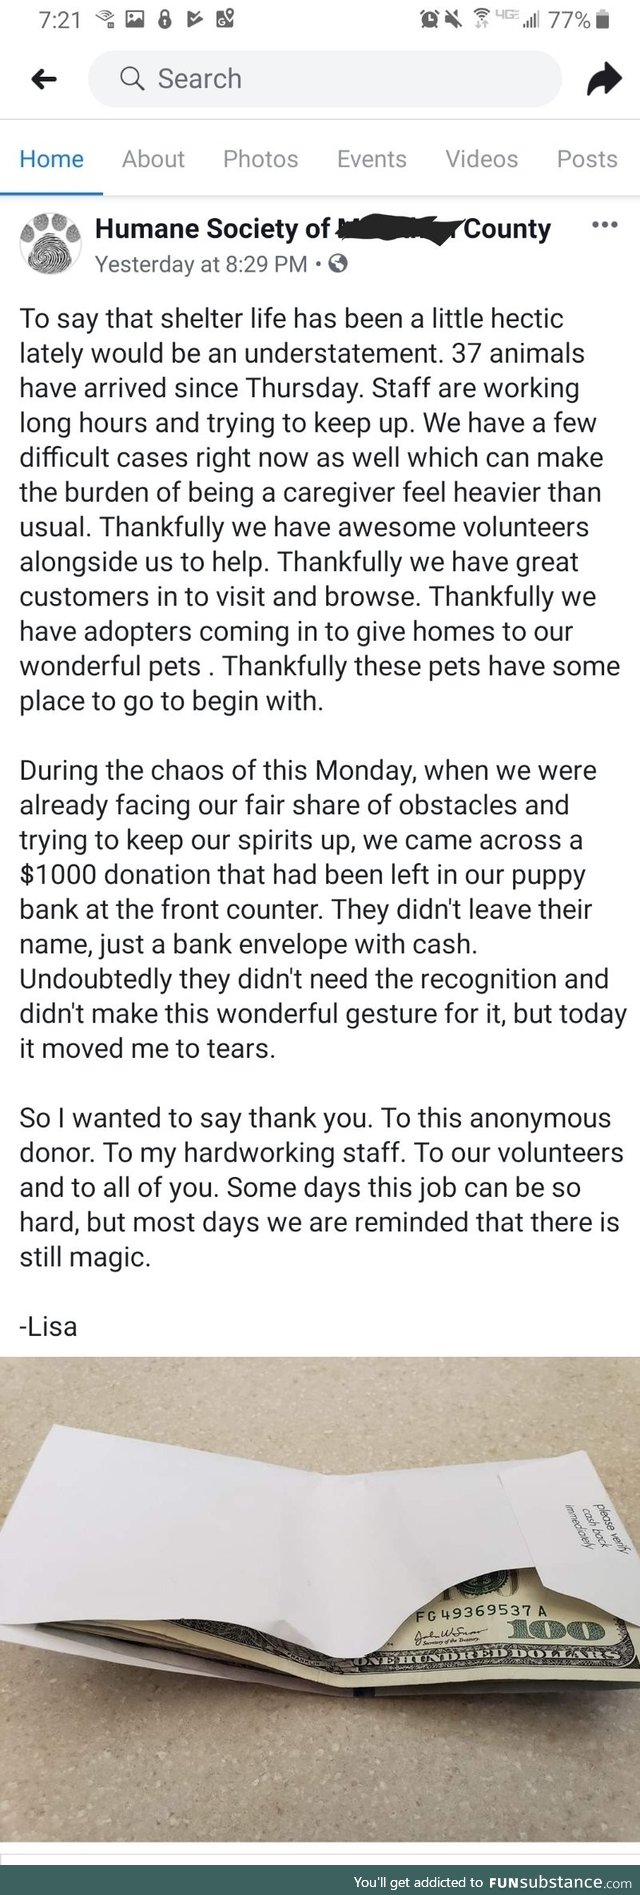 A thank you, from Lisa